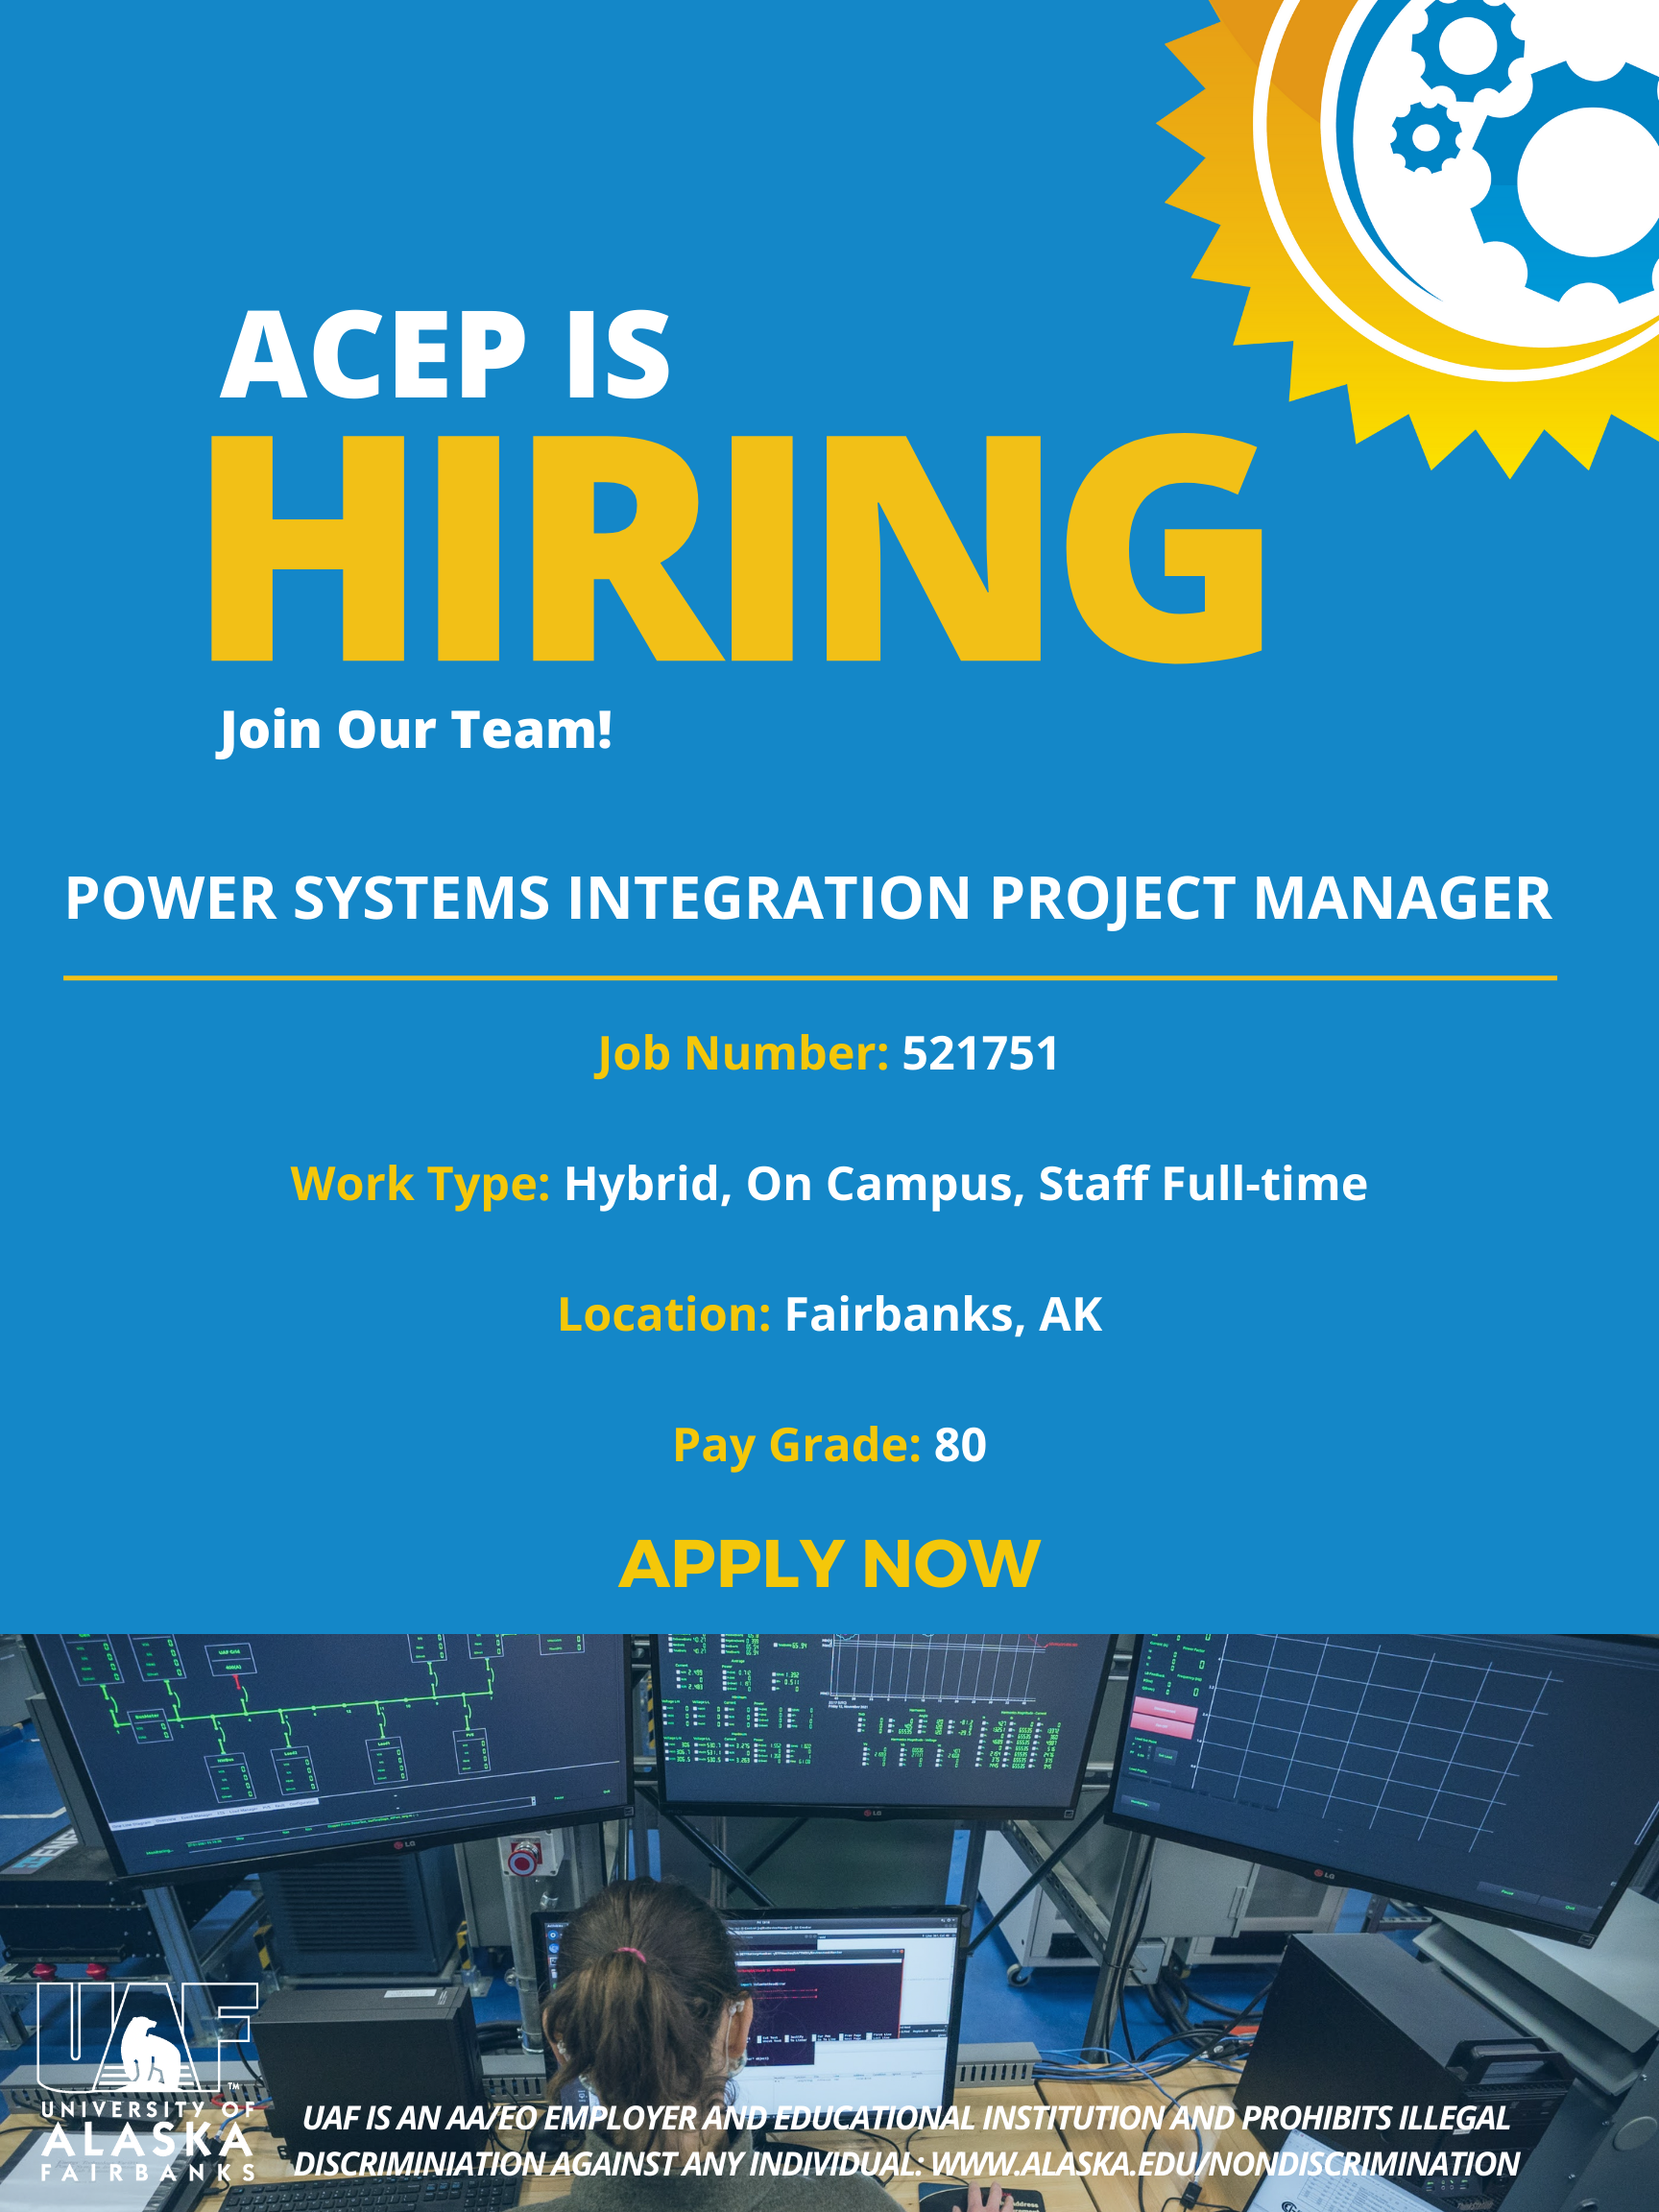 Join ACEP as the Power Systems Integration Project Manager